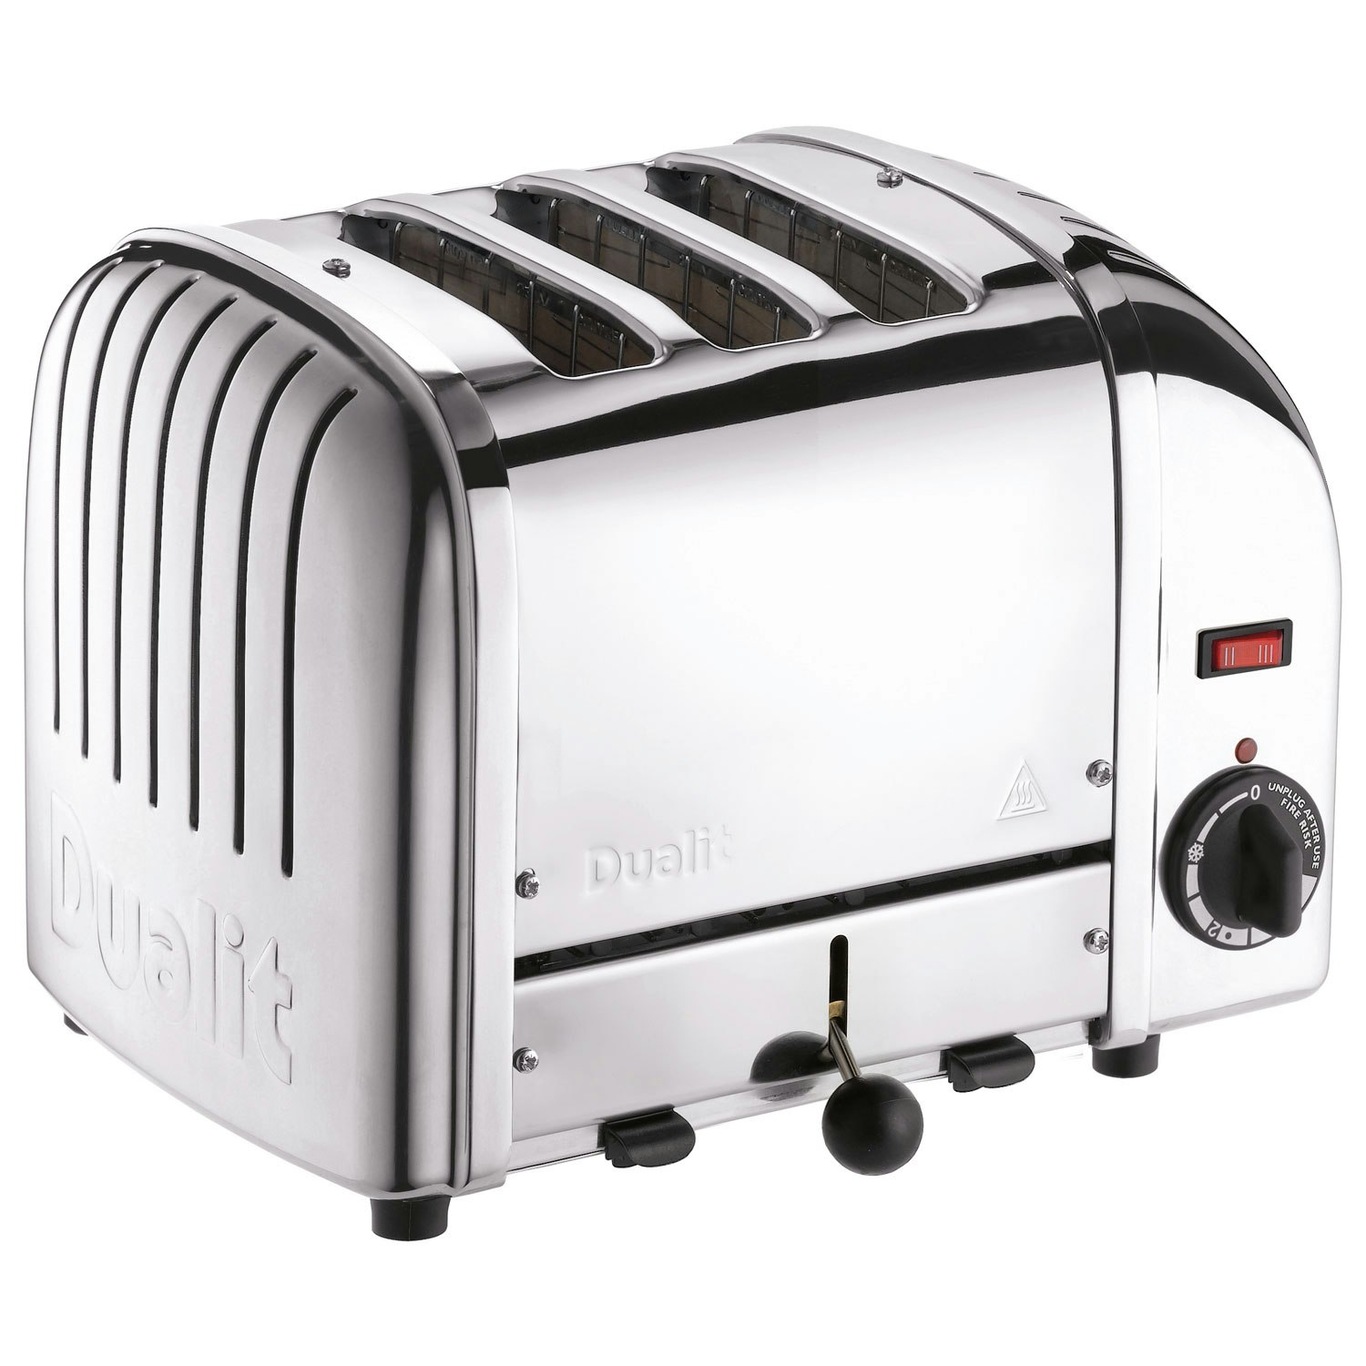 Classic Toaster 3 Slices + Warming Rack, Stainless Steel